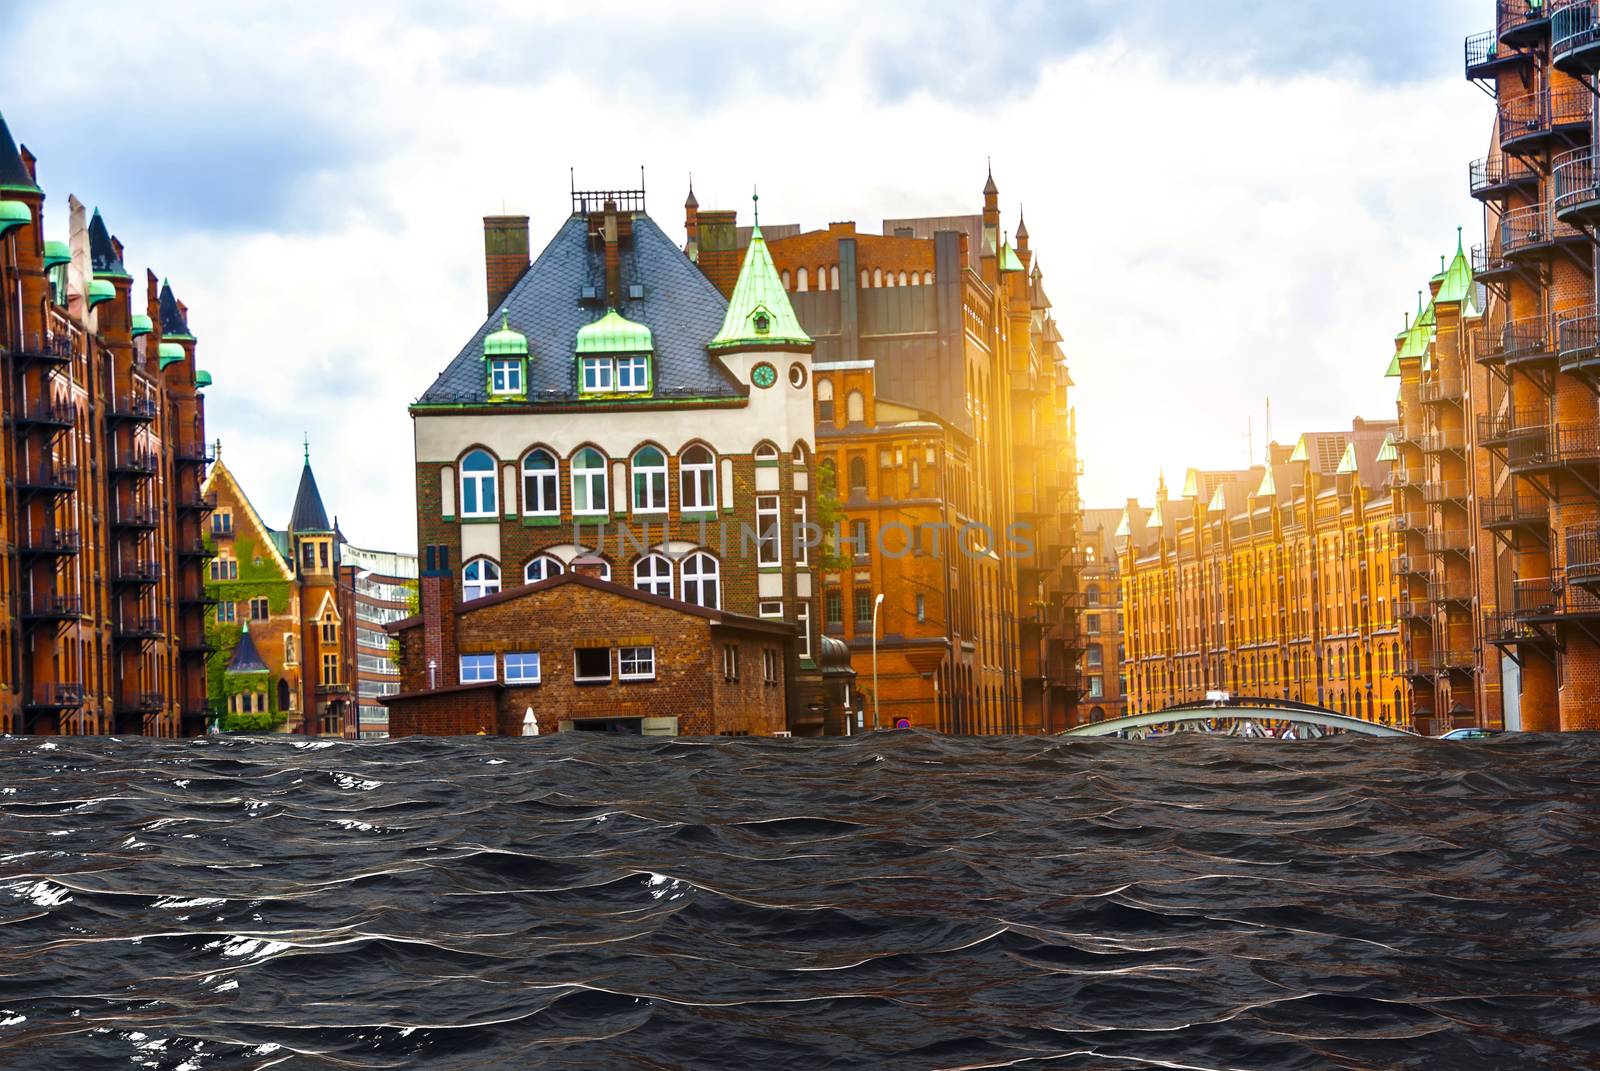 Hamburg in the Future by Fr@nk